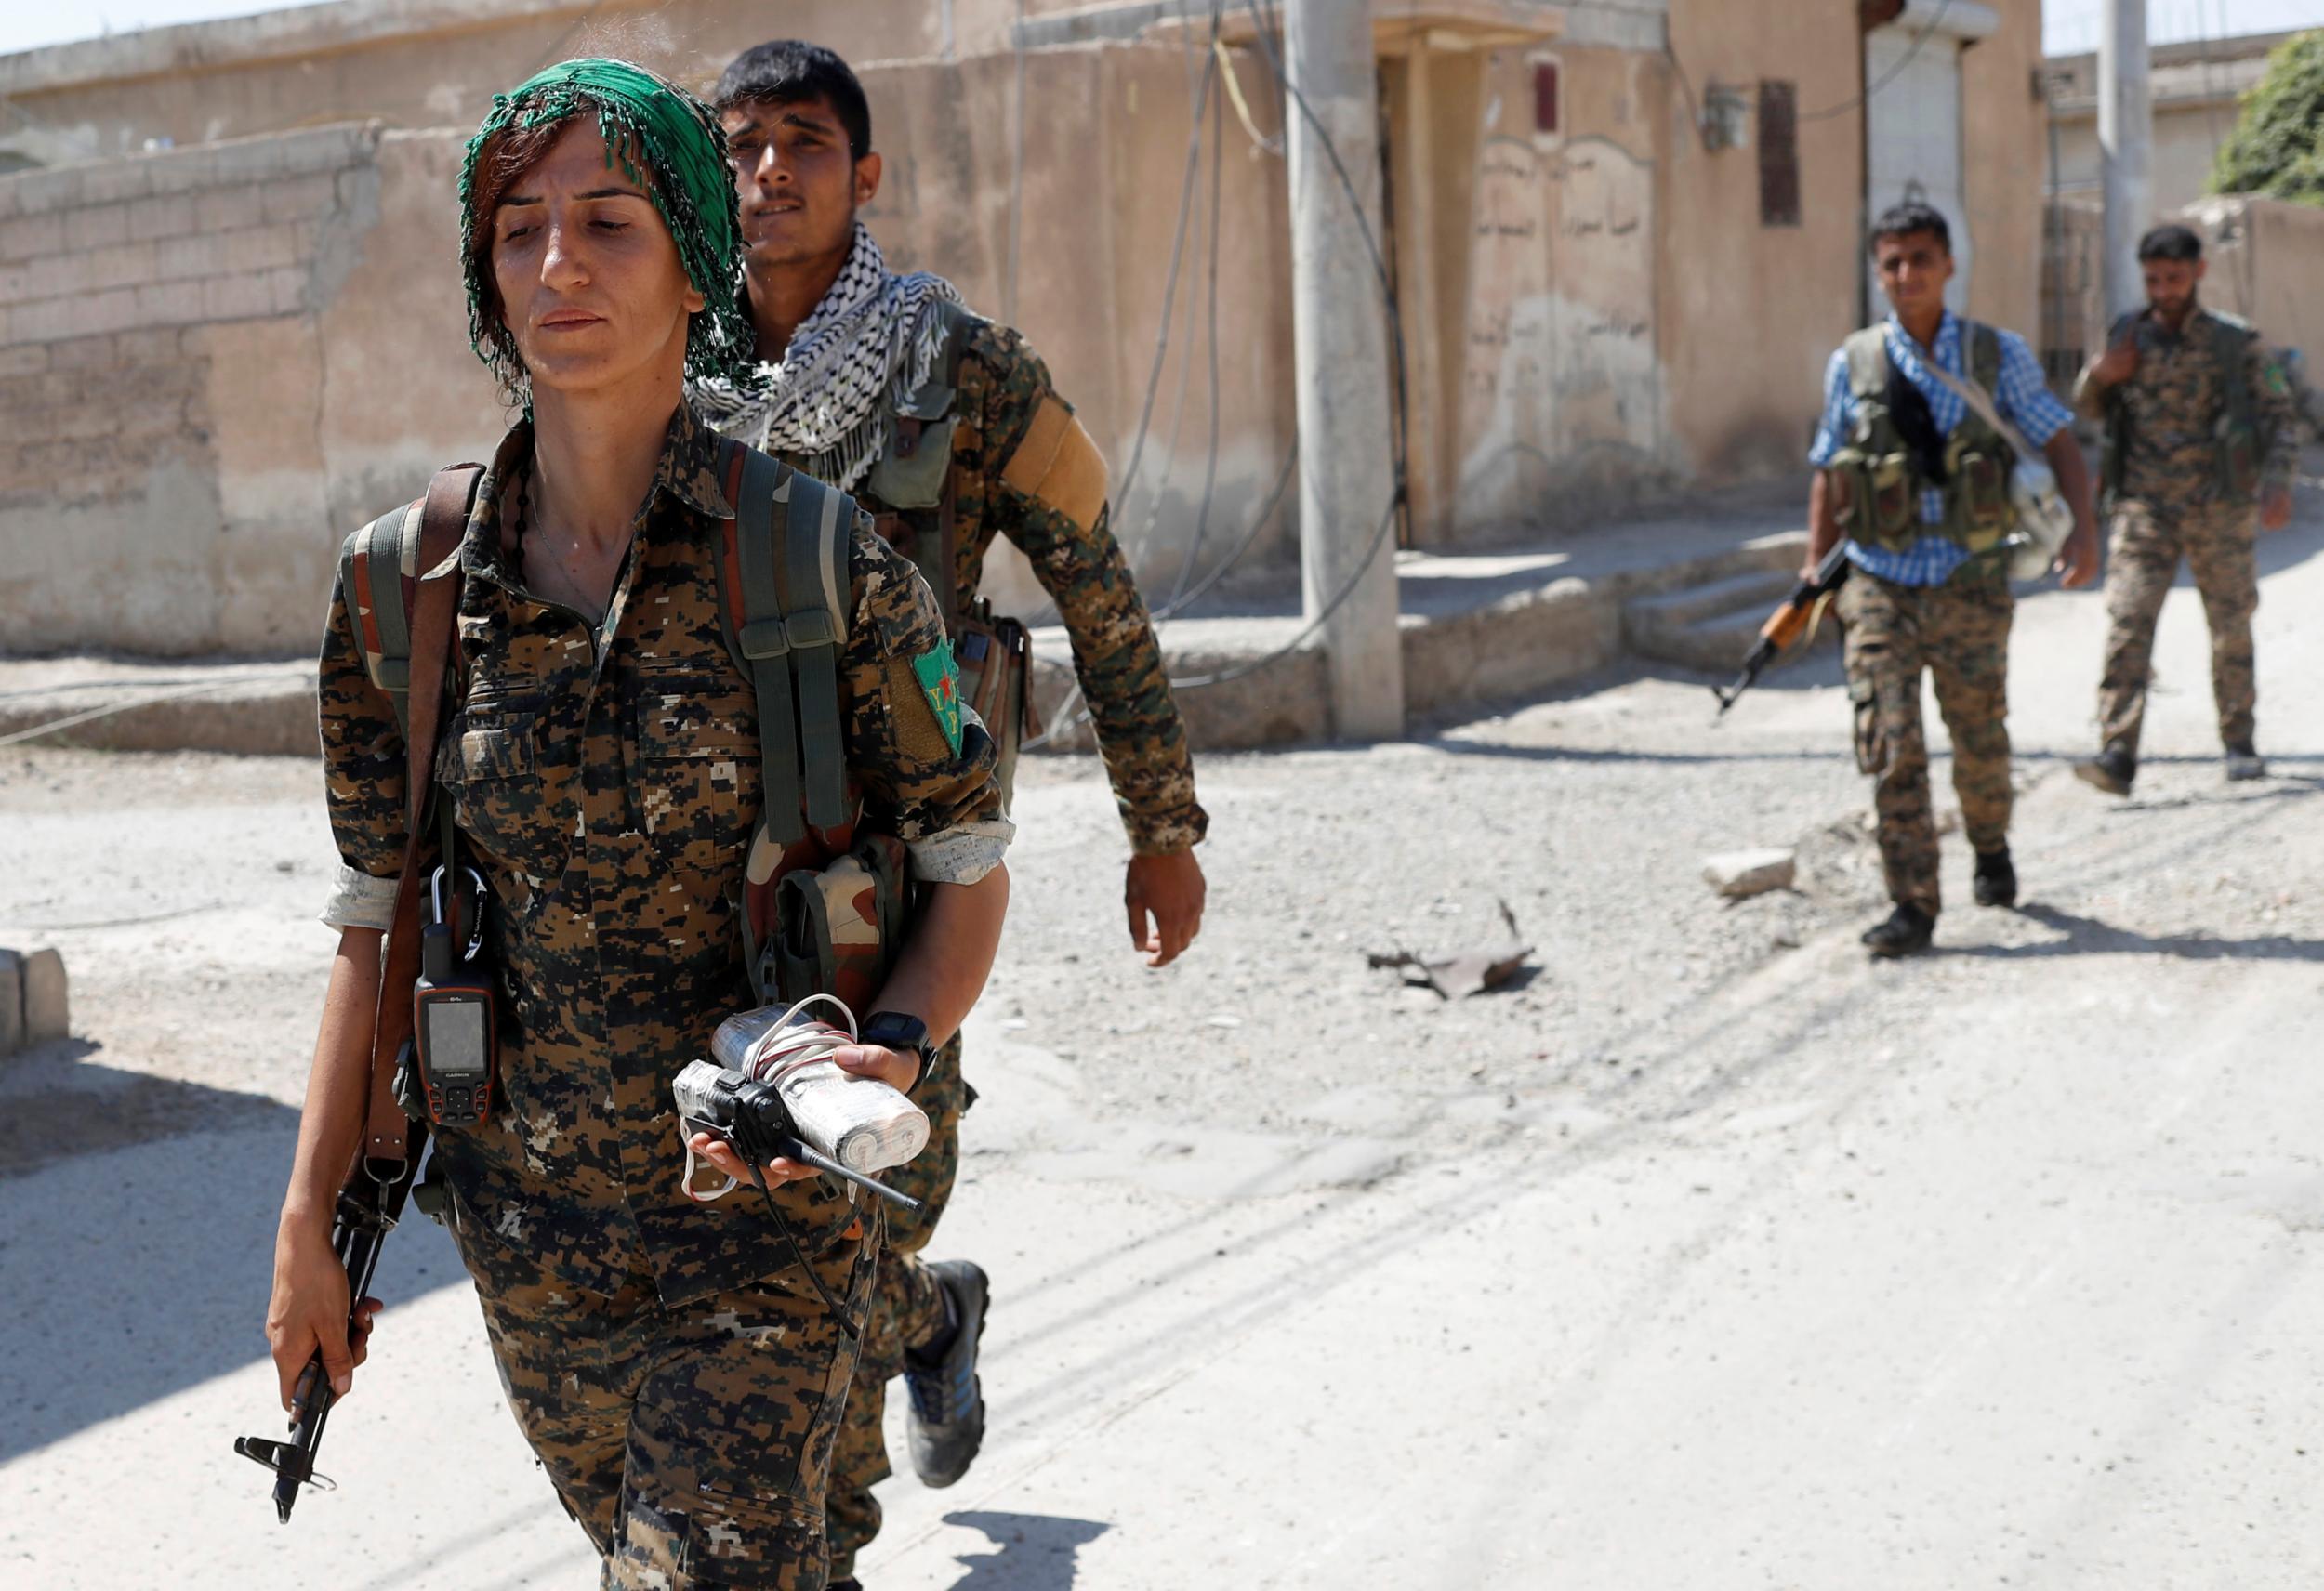 Kurdish People's Protection Units (YPG) fighters, part of the umbrella Syrian Democratic Forces (SDF), walk through a reclaimed neighbourhood of Raqqa on 16 June 2017